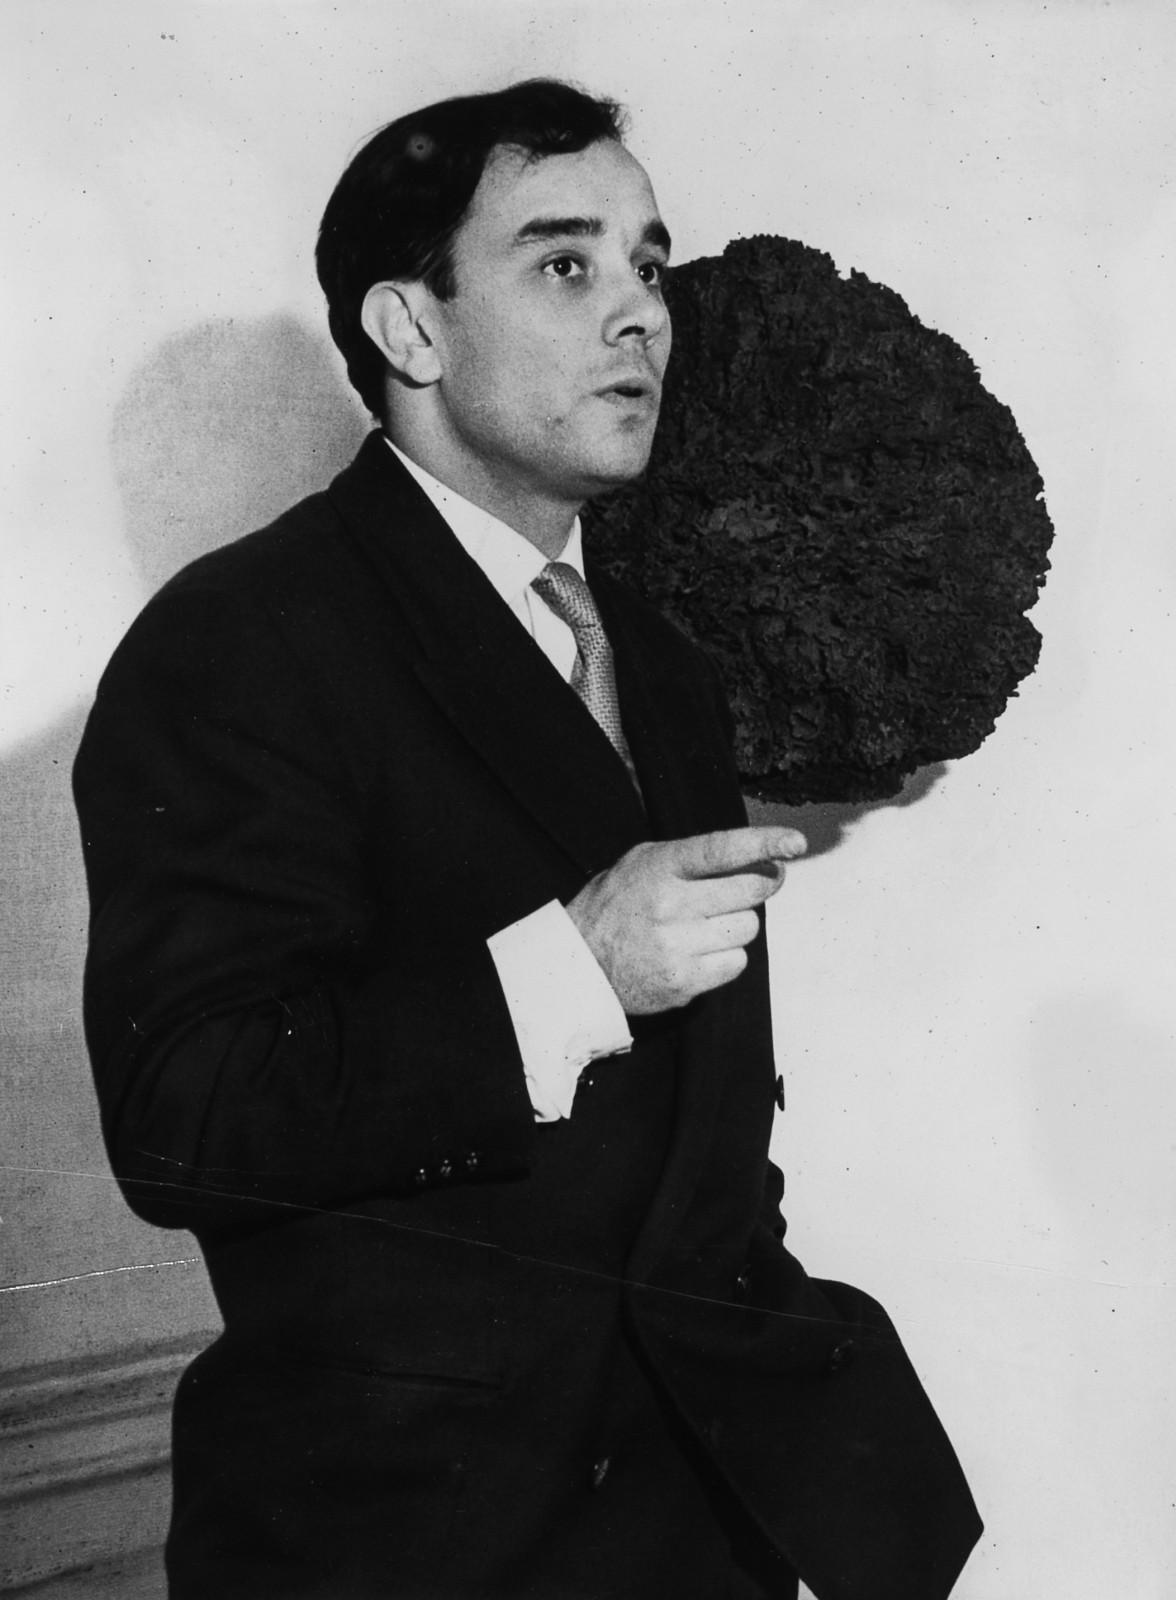 Yves Klein during the opening of the exhibition "Monochrome Propositions of Yves Klein », Gallery One, London, 1957